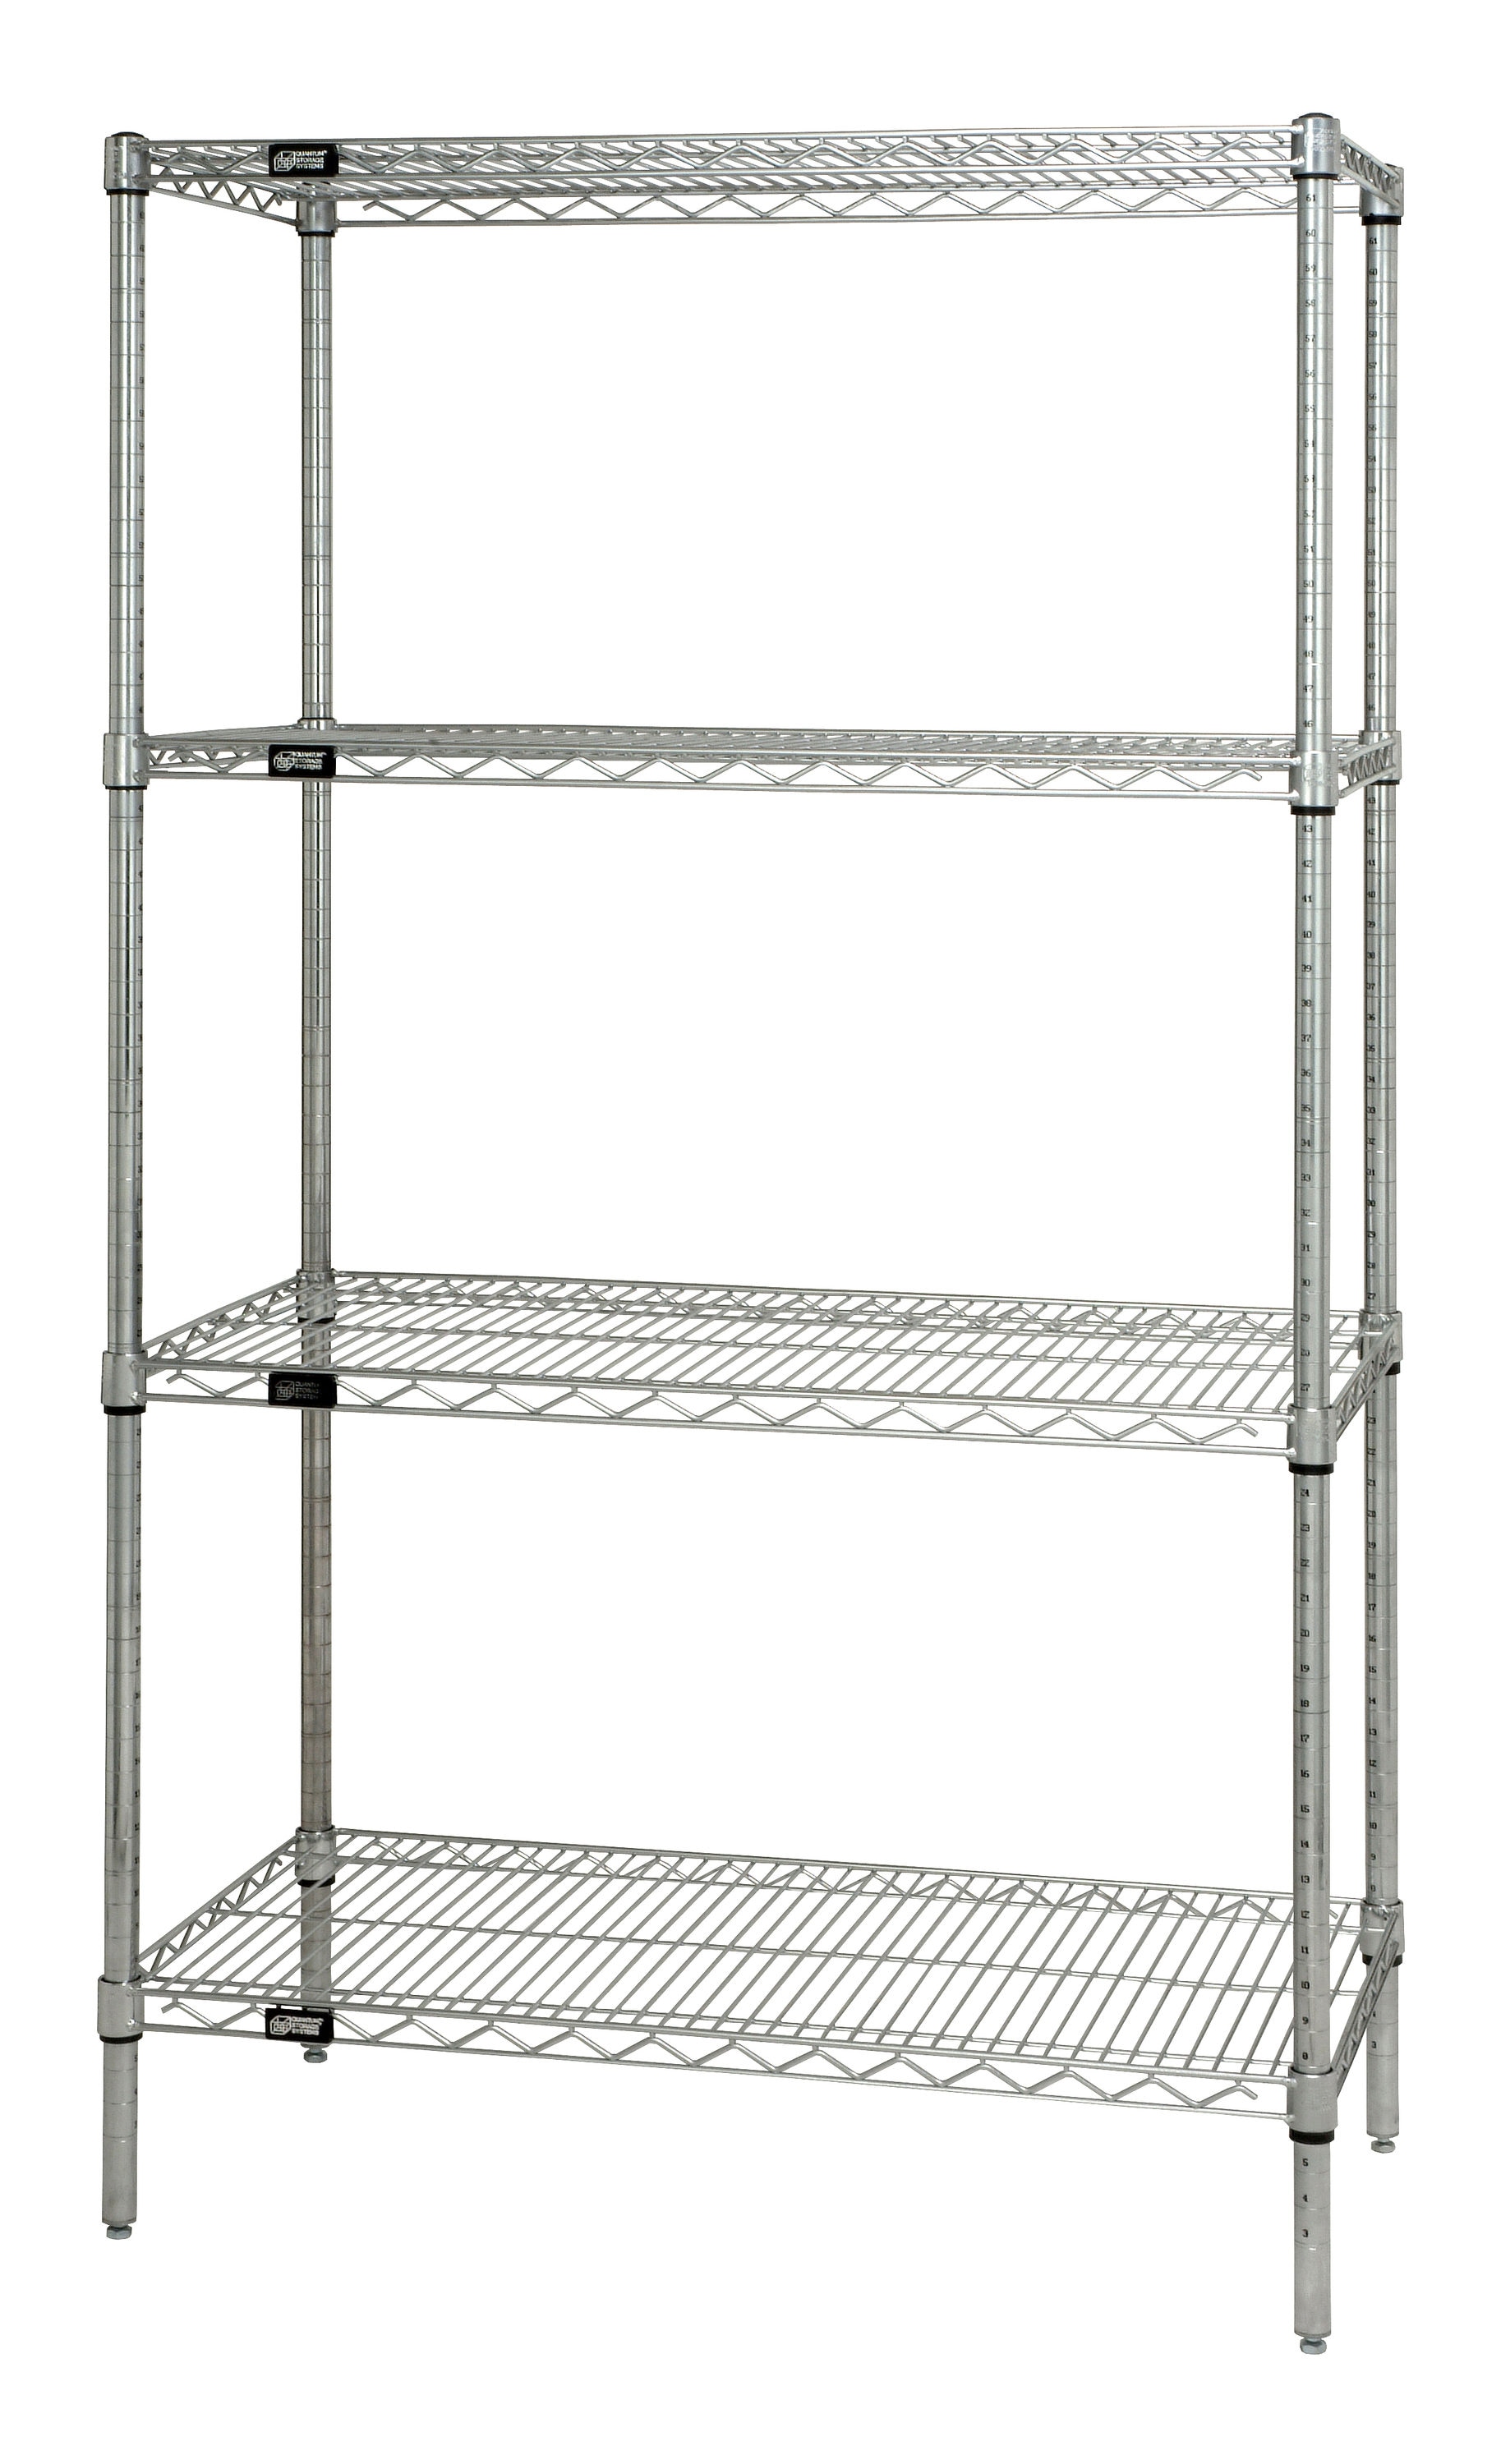 Chrome Finish 1 Width x 24 Length x 4 Height Quantum Storage Systems SL24 Side Ledge for 24 Deep Wire Shelving Units 